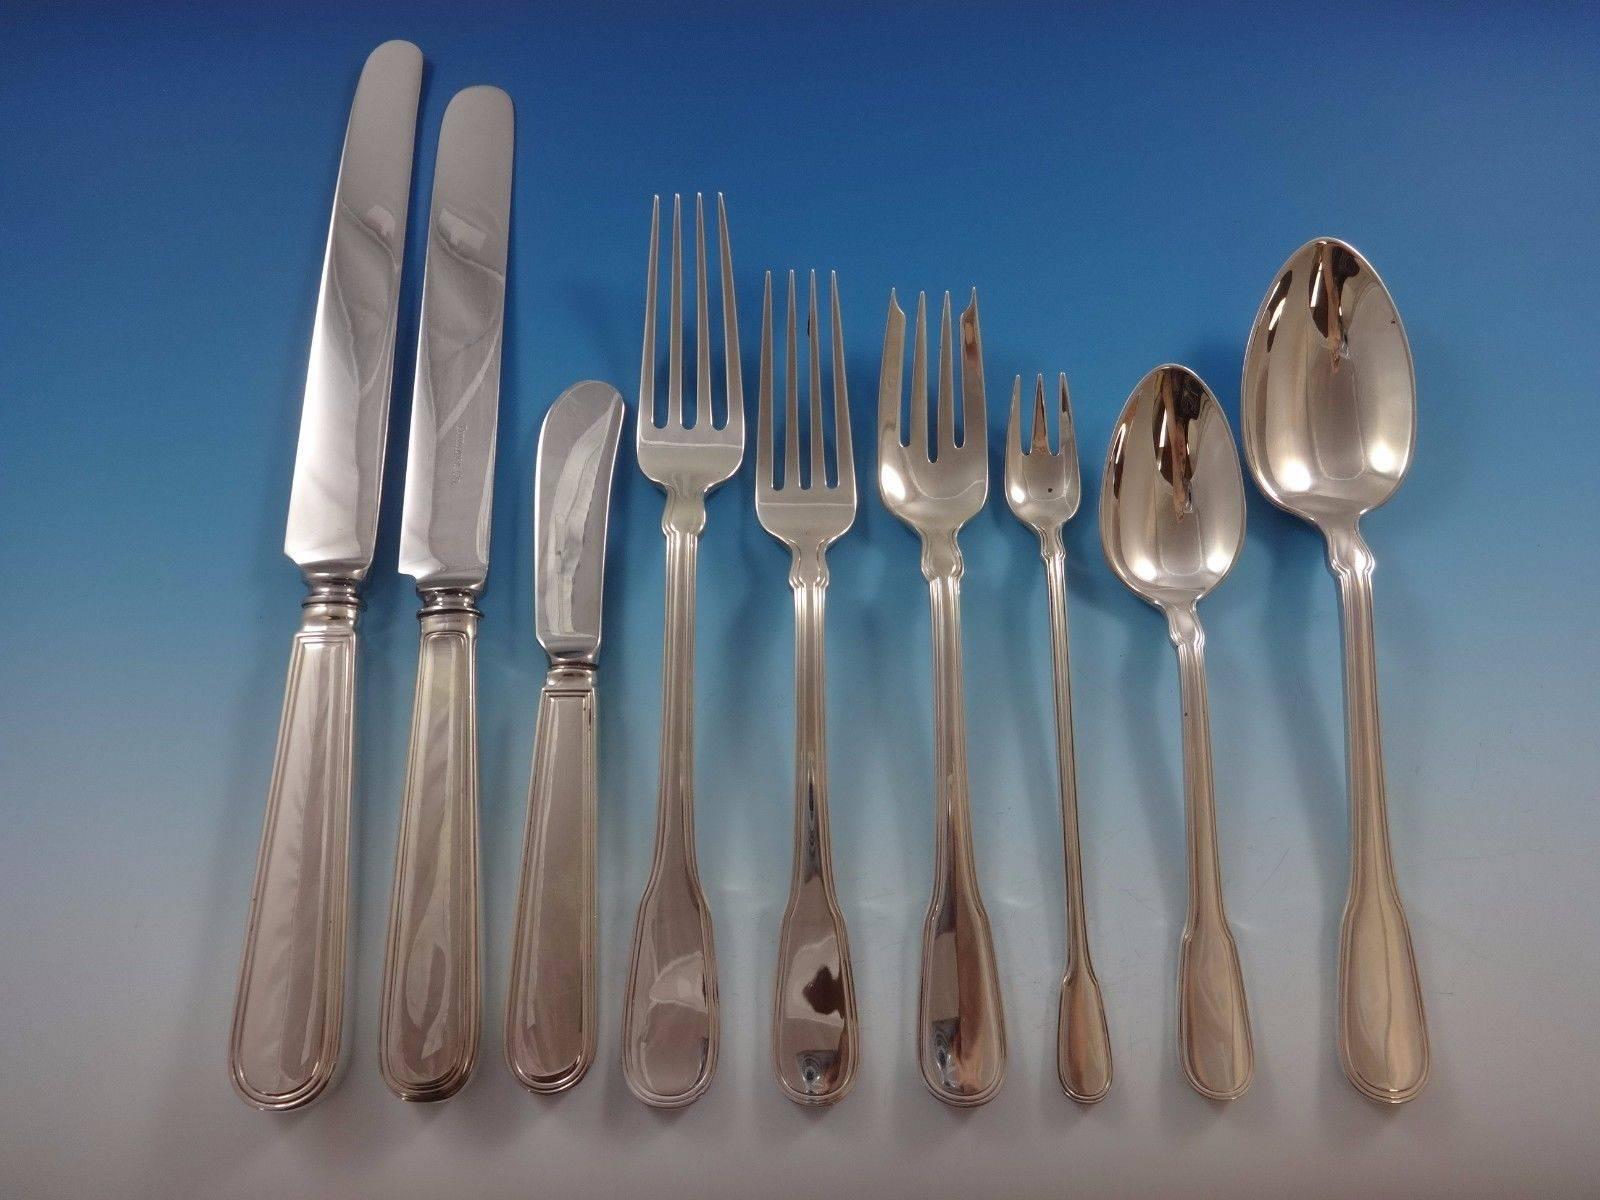 Hamilton Gramercy Tiffany Sterling Silver Flatware Set 12 Service 111 Pcs Dinner In Excellent Condition For Sale In Big Bend, WI